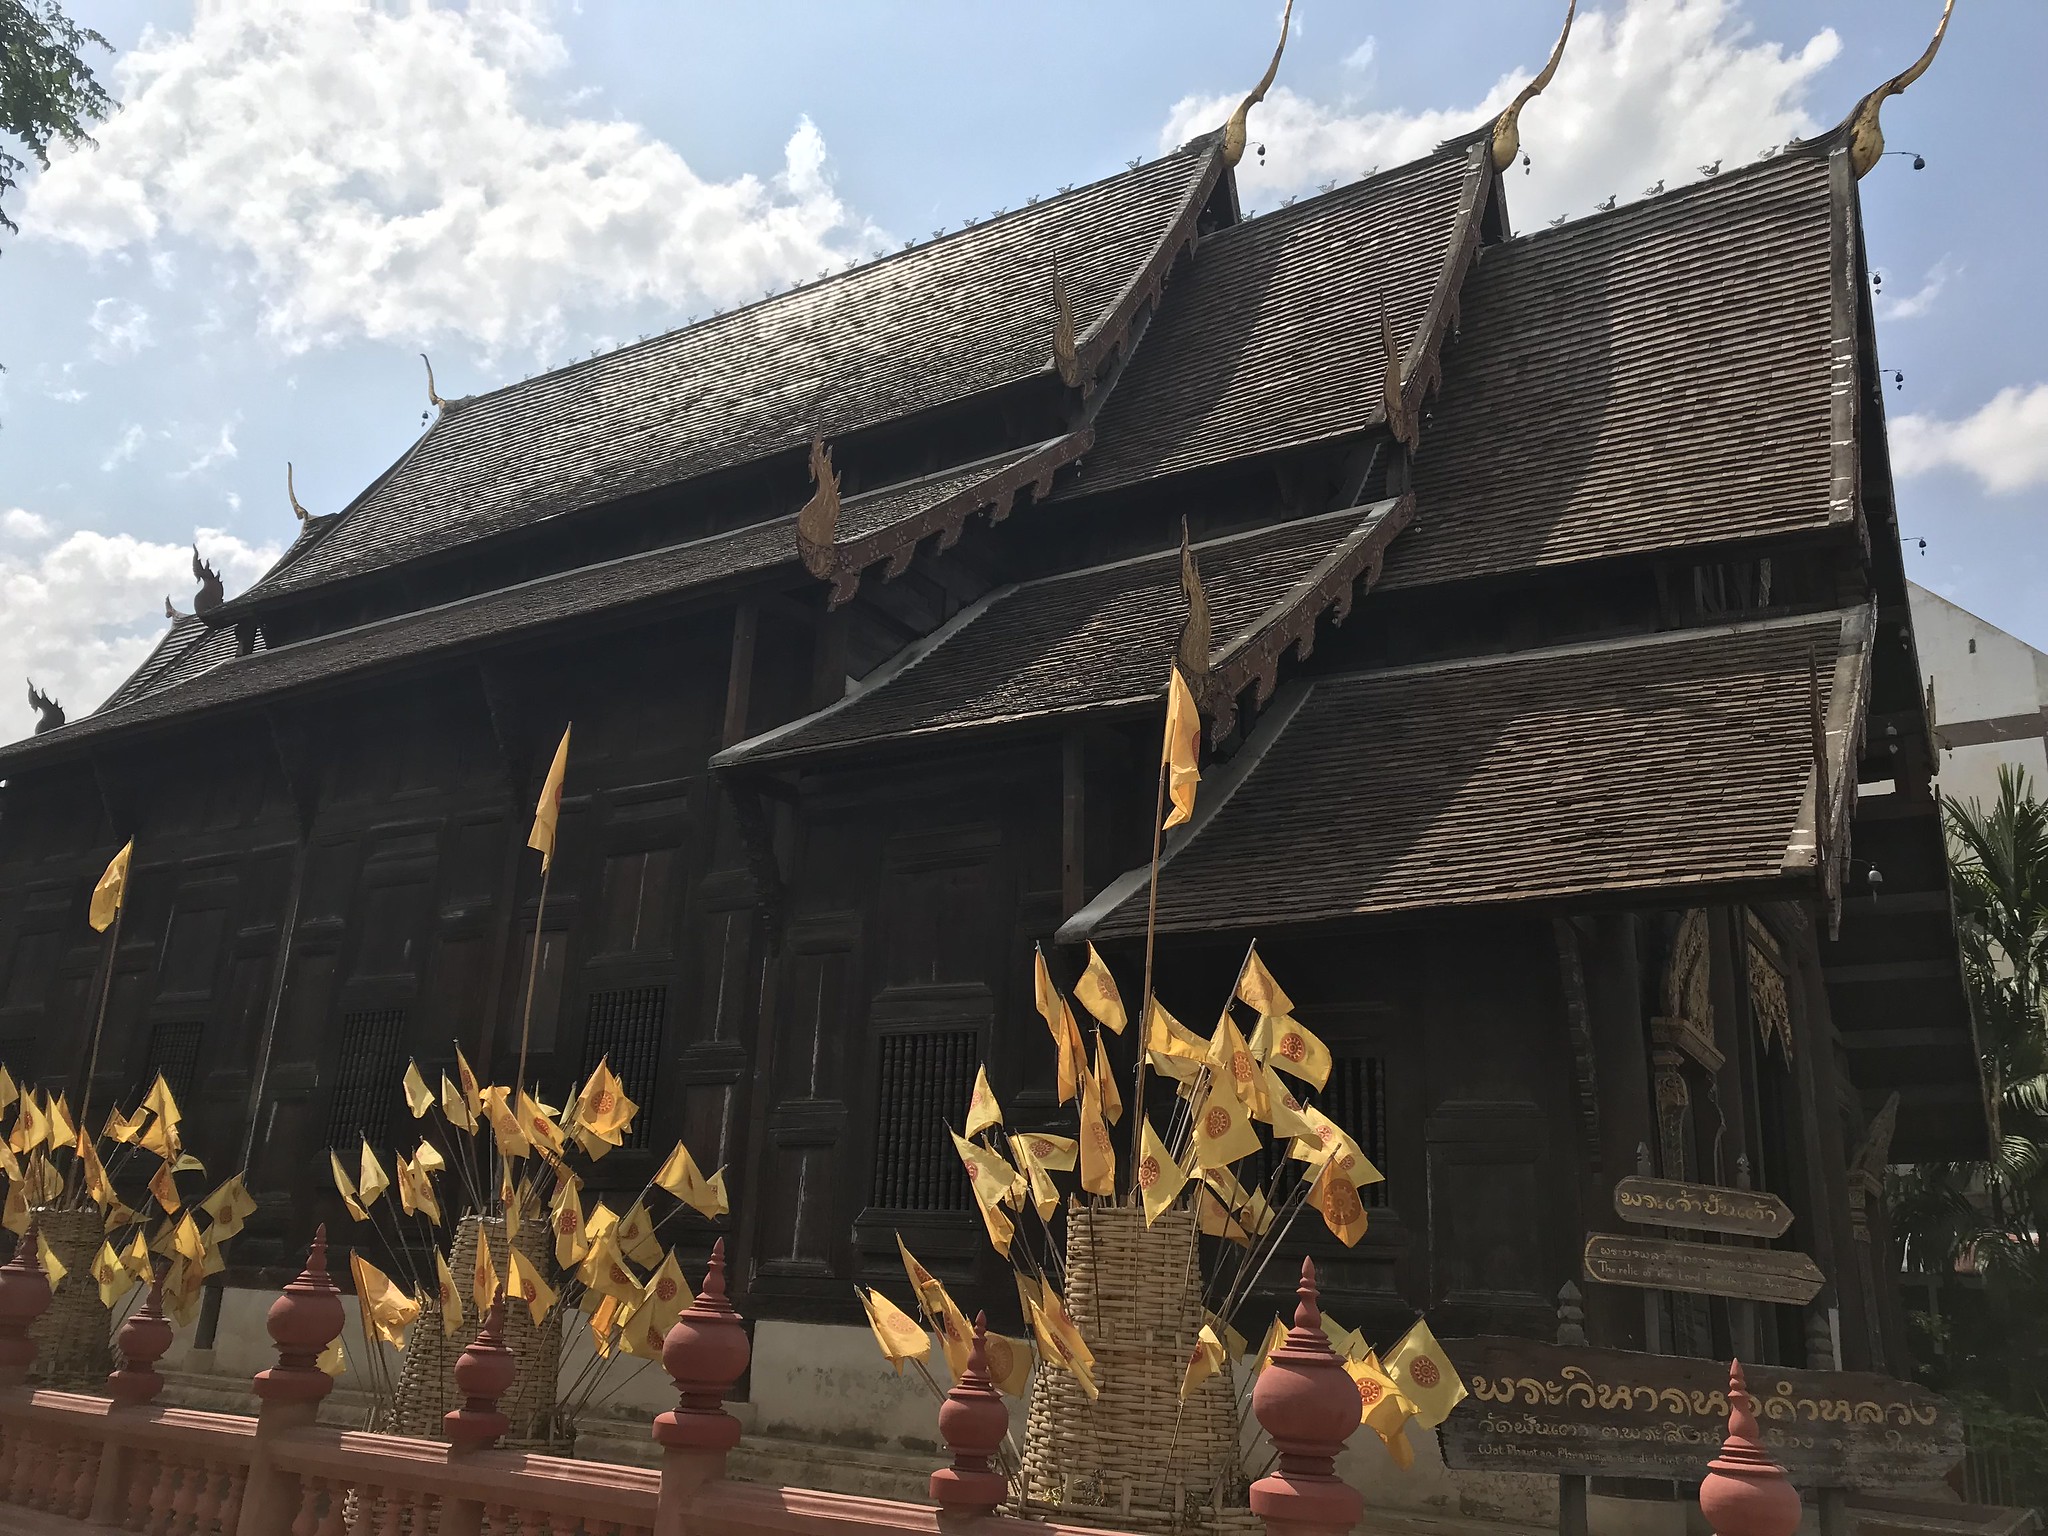 15 Best Things to do in Chiang Mai, Thailand